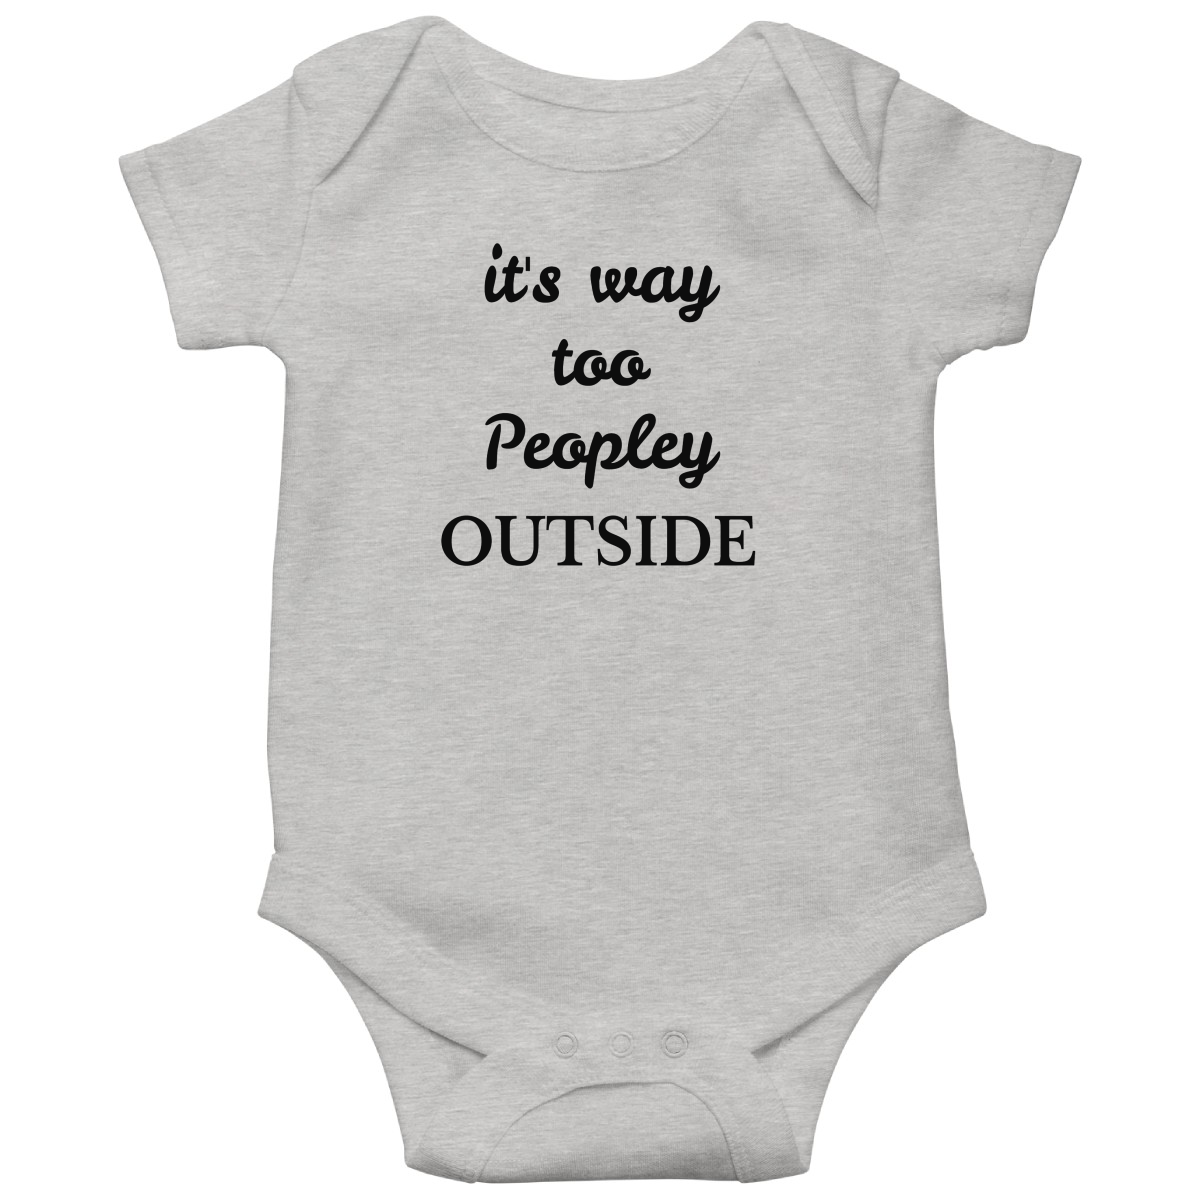 It's way Too Peopley Outside Baby Bodysuits | Gray